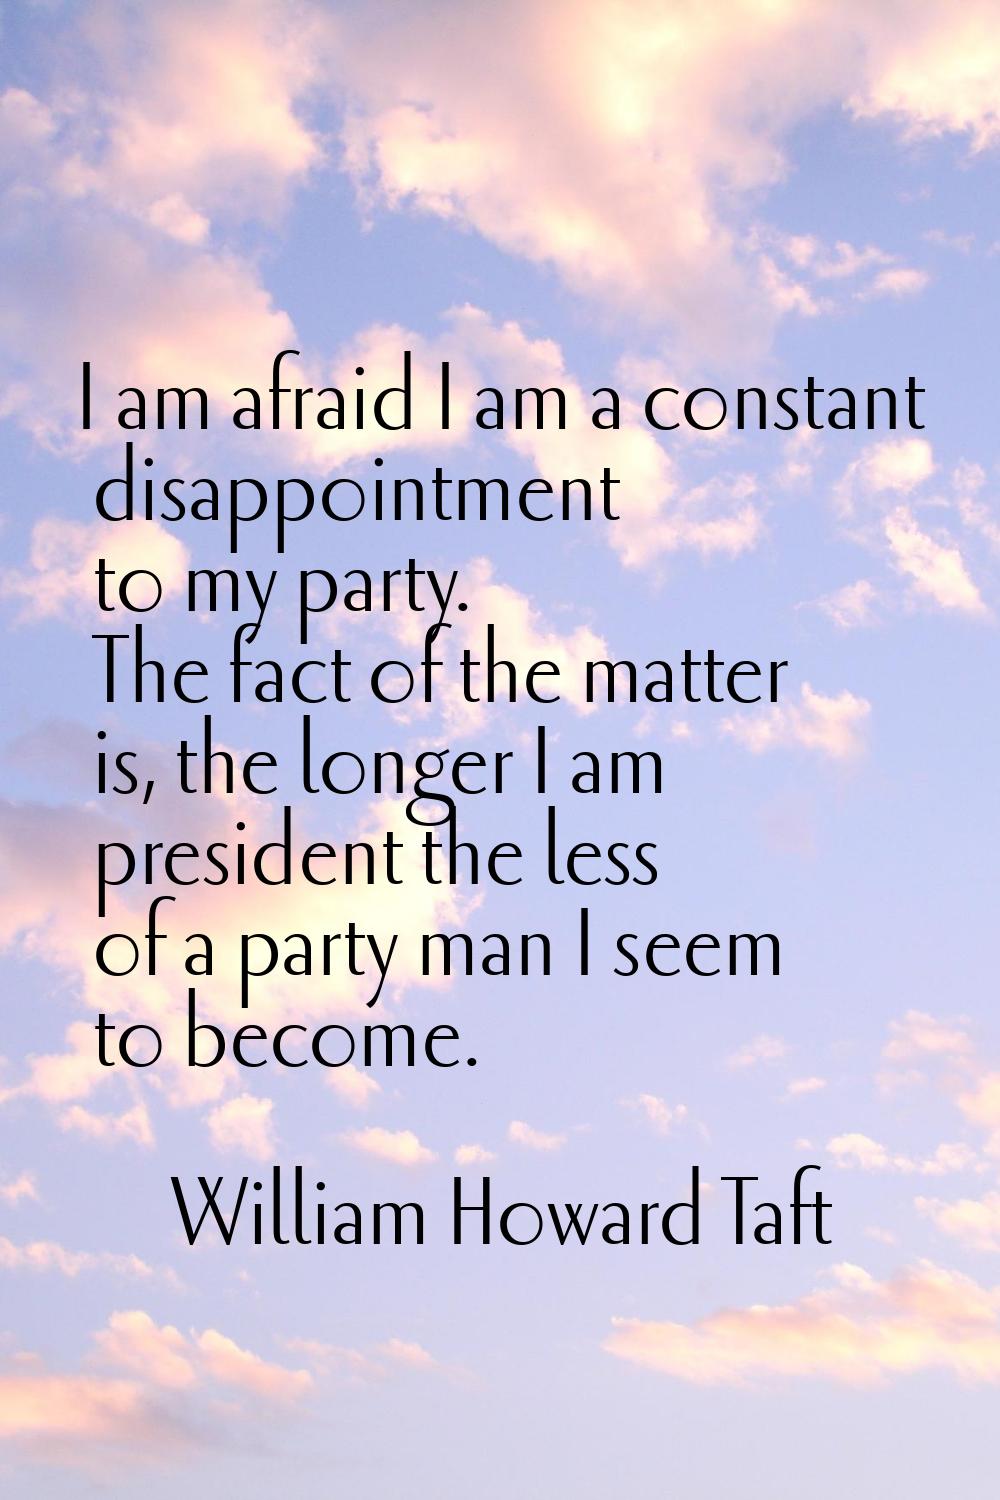 I am afraid I am a constant disappointment to my party. The fact of the matter is, the longer I am 